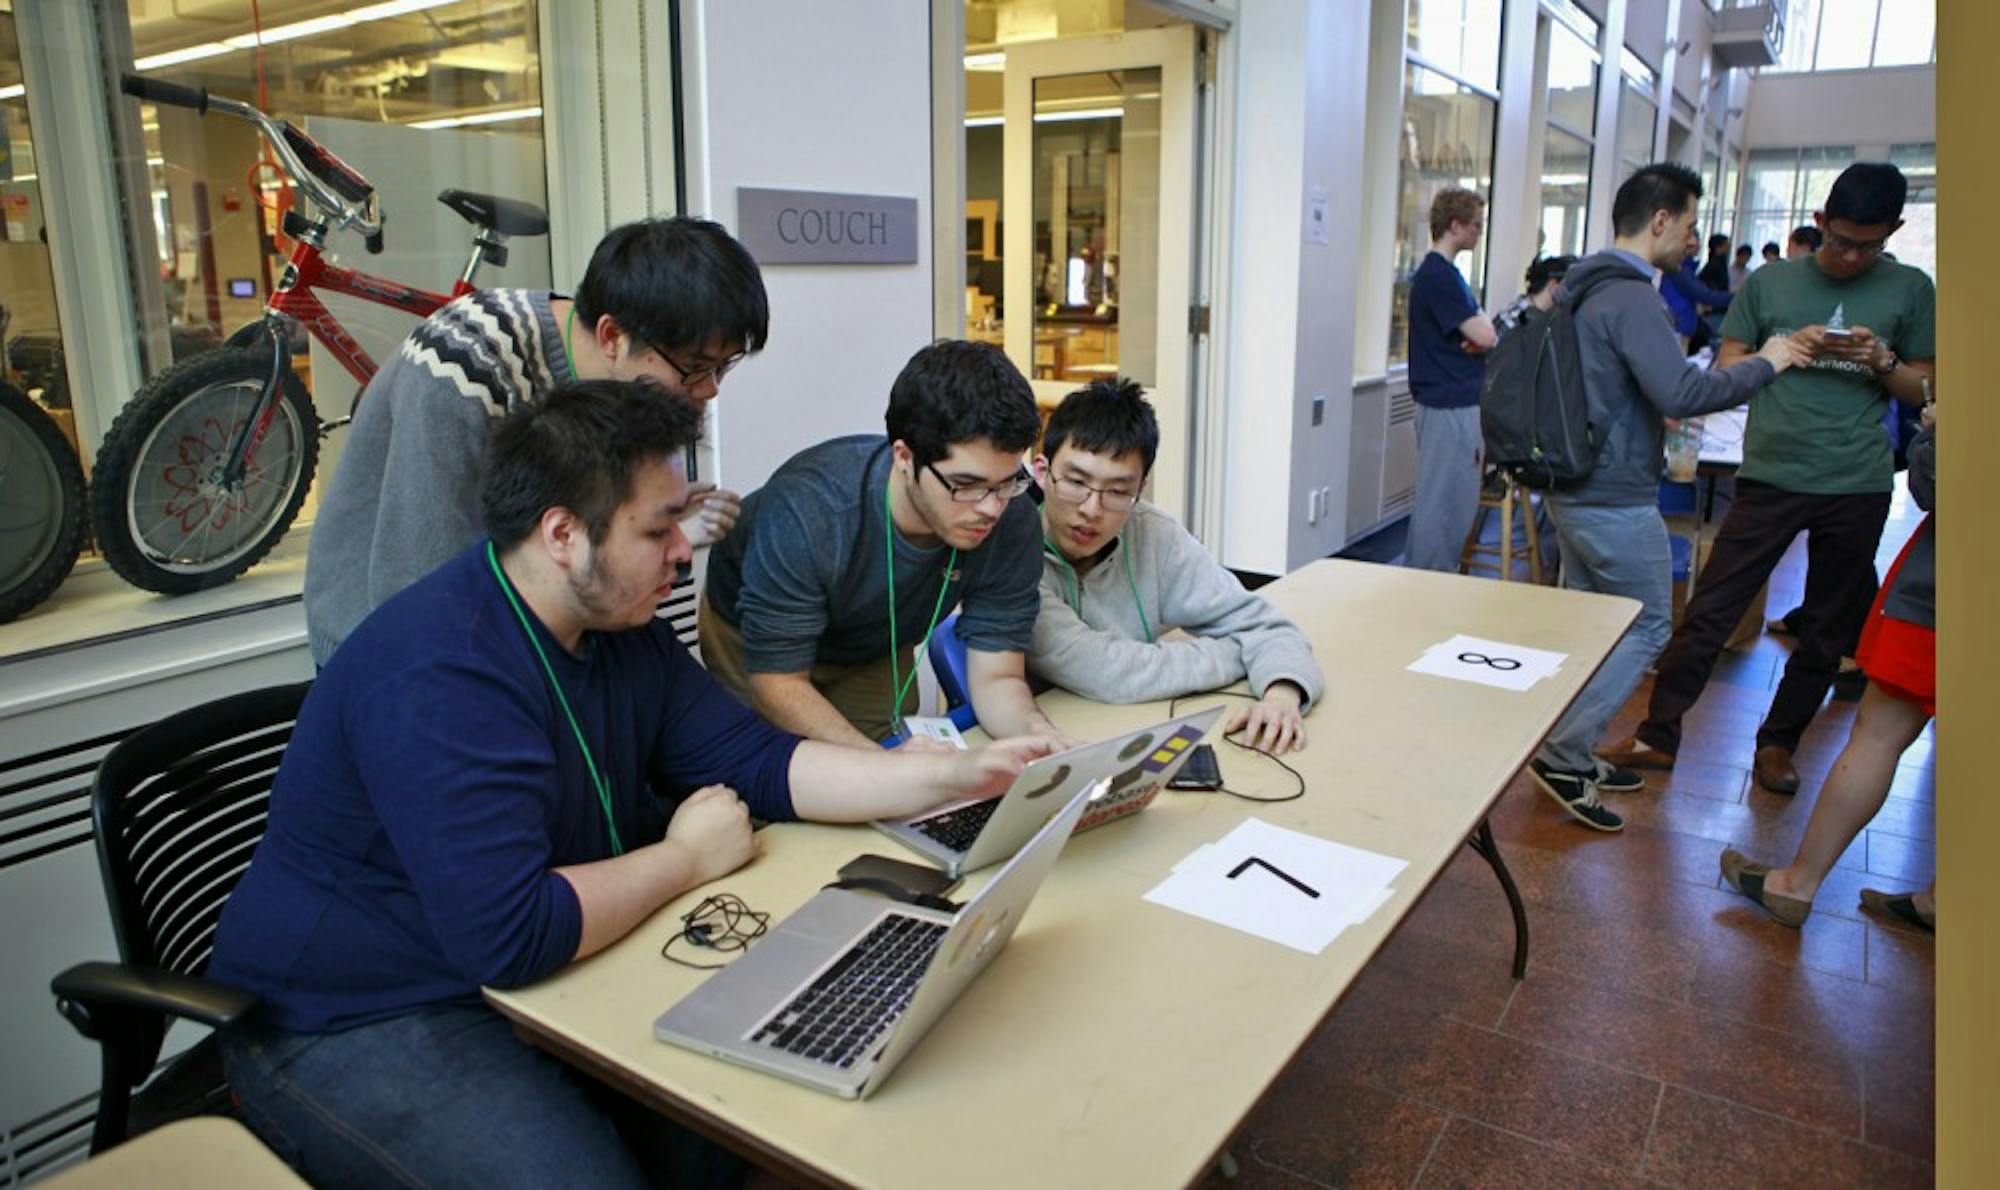 College students worked on projects at the hackathon this weekend